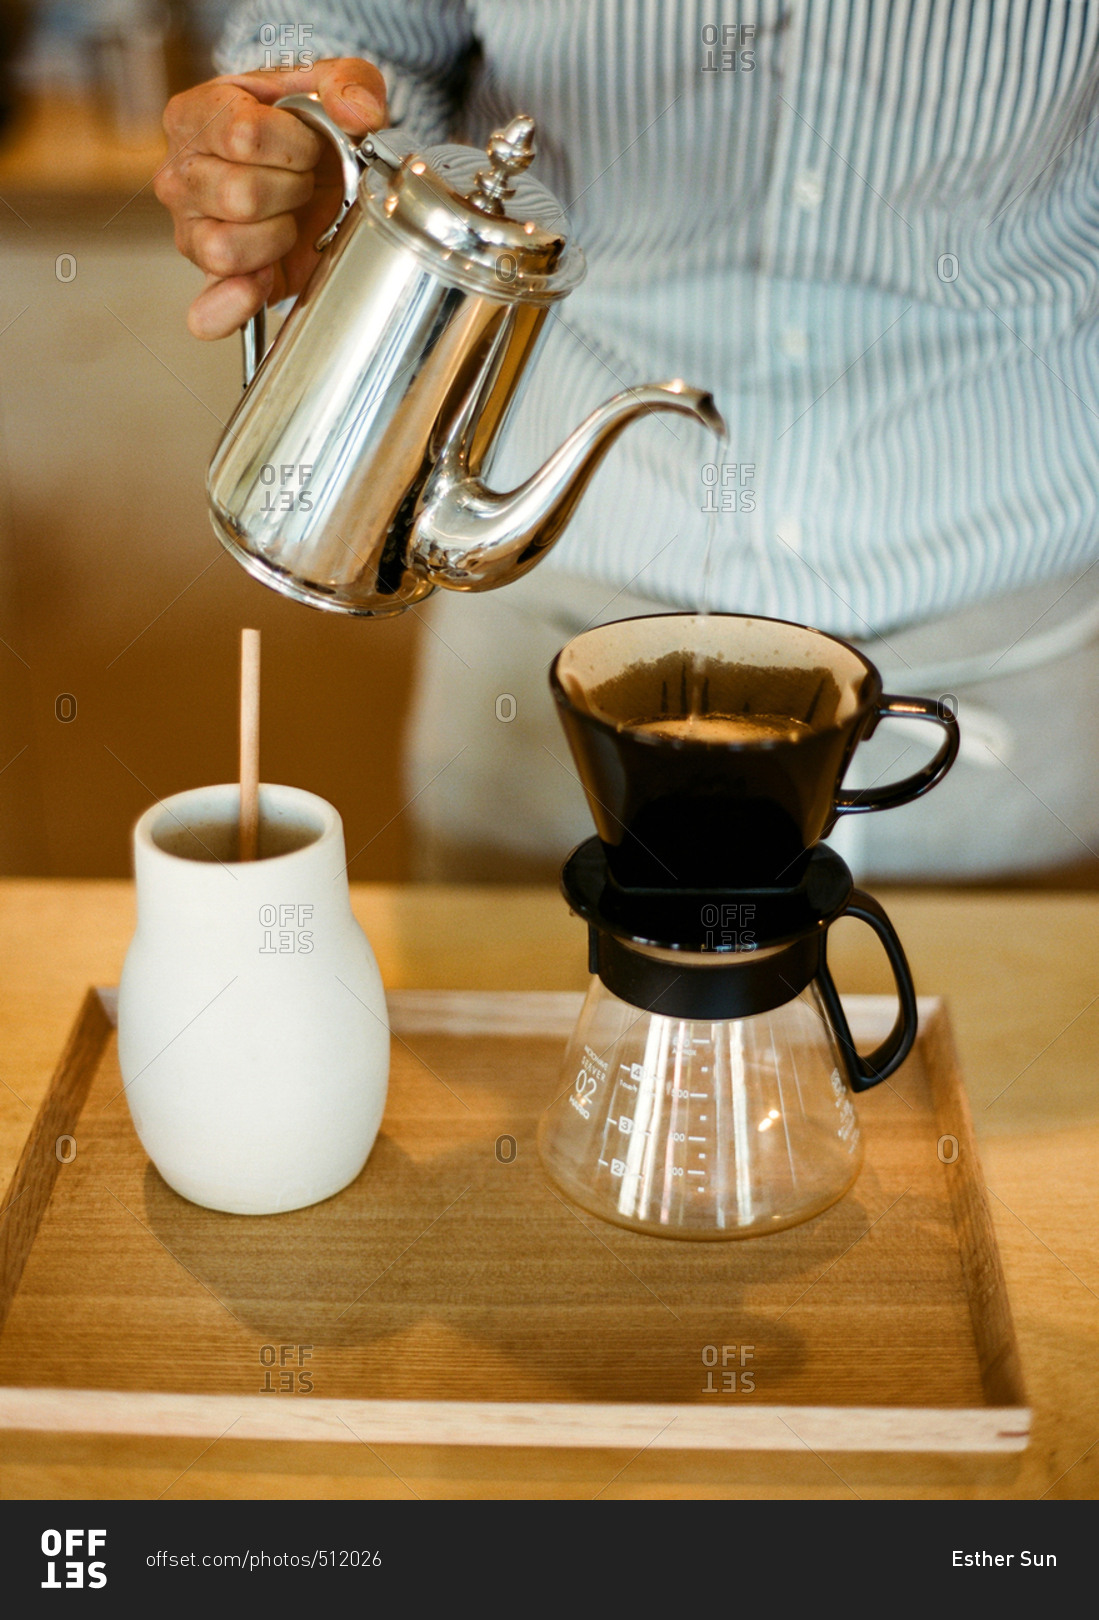 Man pouring hot water over coffee in a pour-over carafe